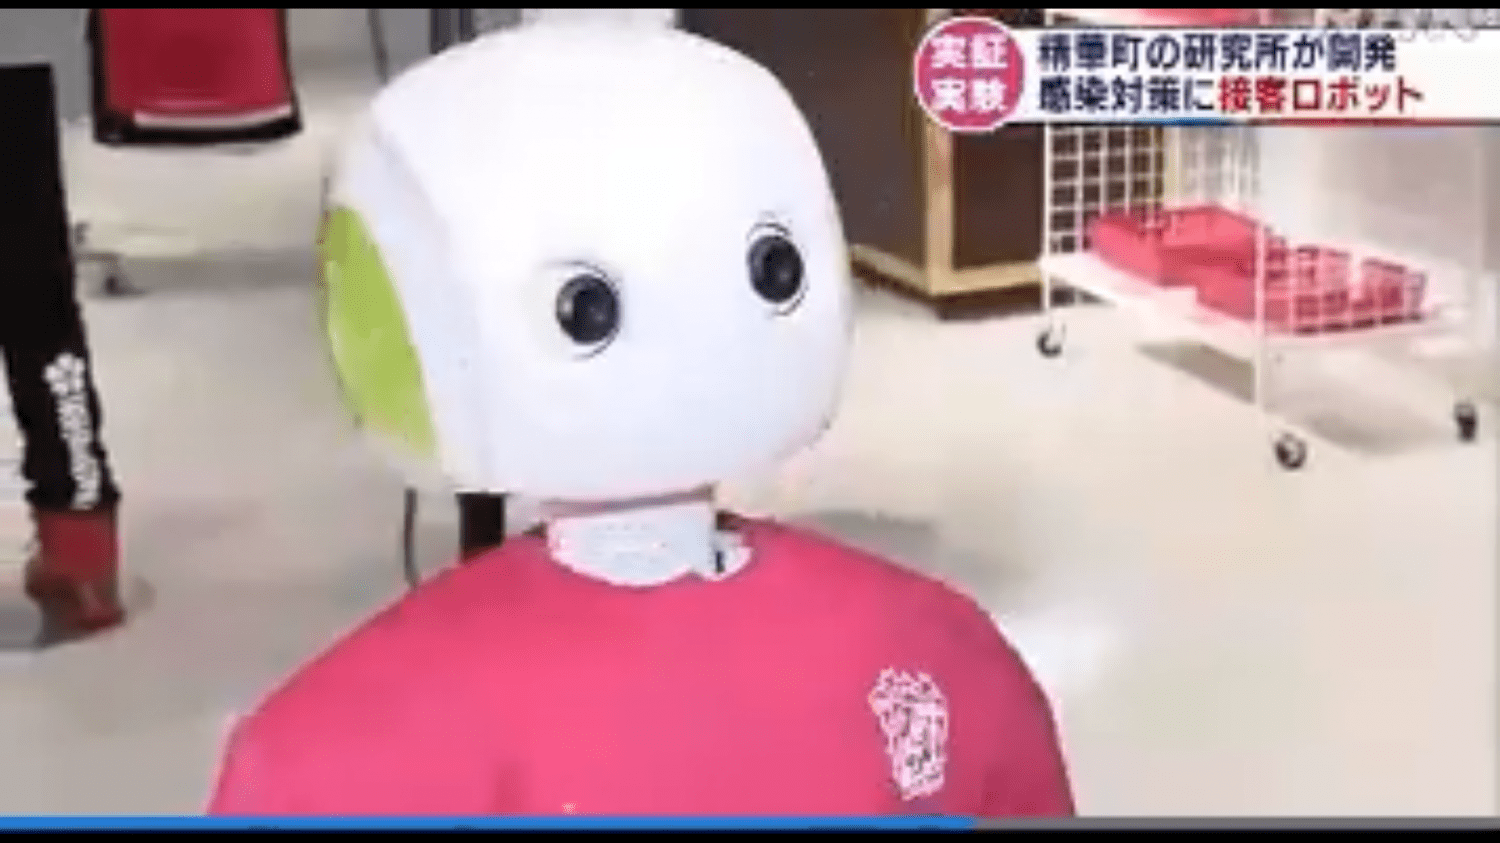 Robovie Employed At A Japanese Shop To Tell Customers to Wear Face Masks